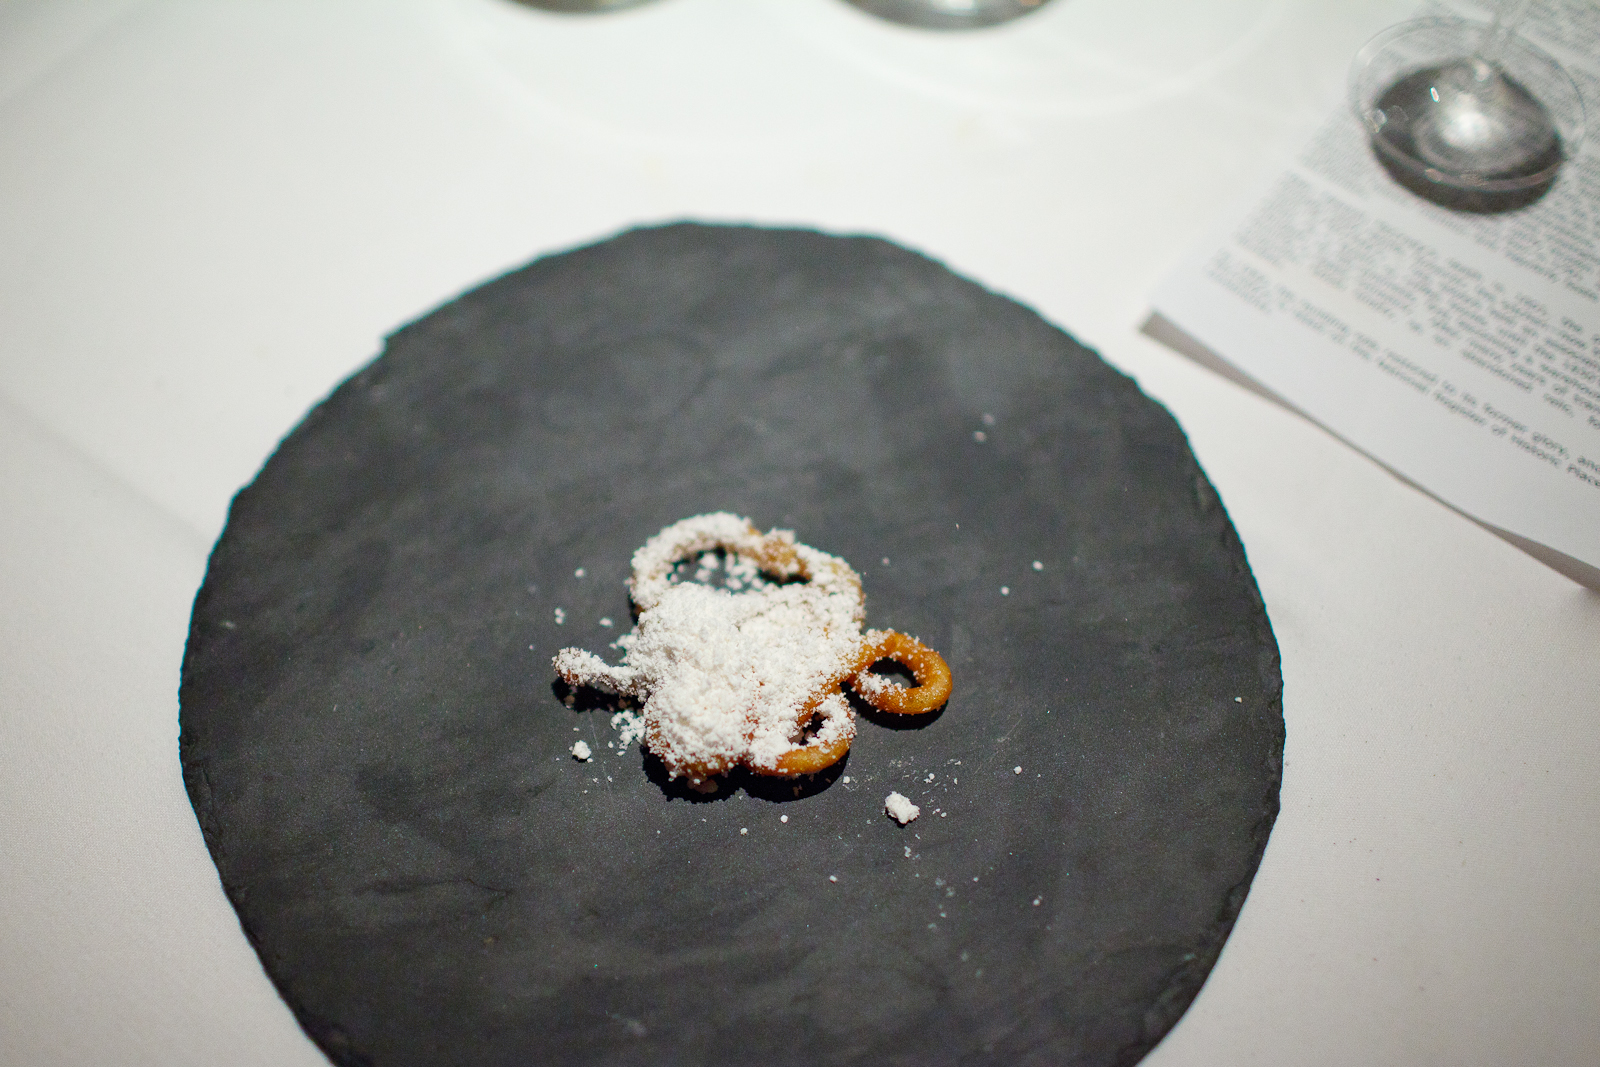 9th Course; Carnival-style funnel cake sprinkled with sweetened pork fat